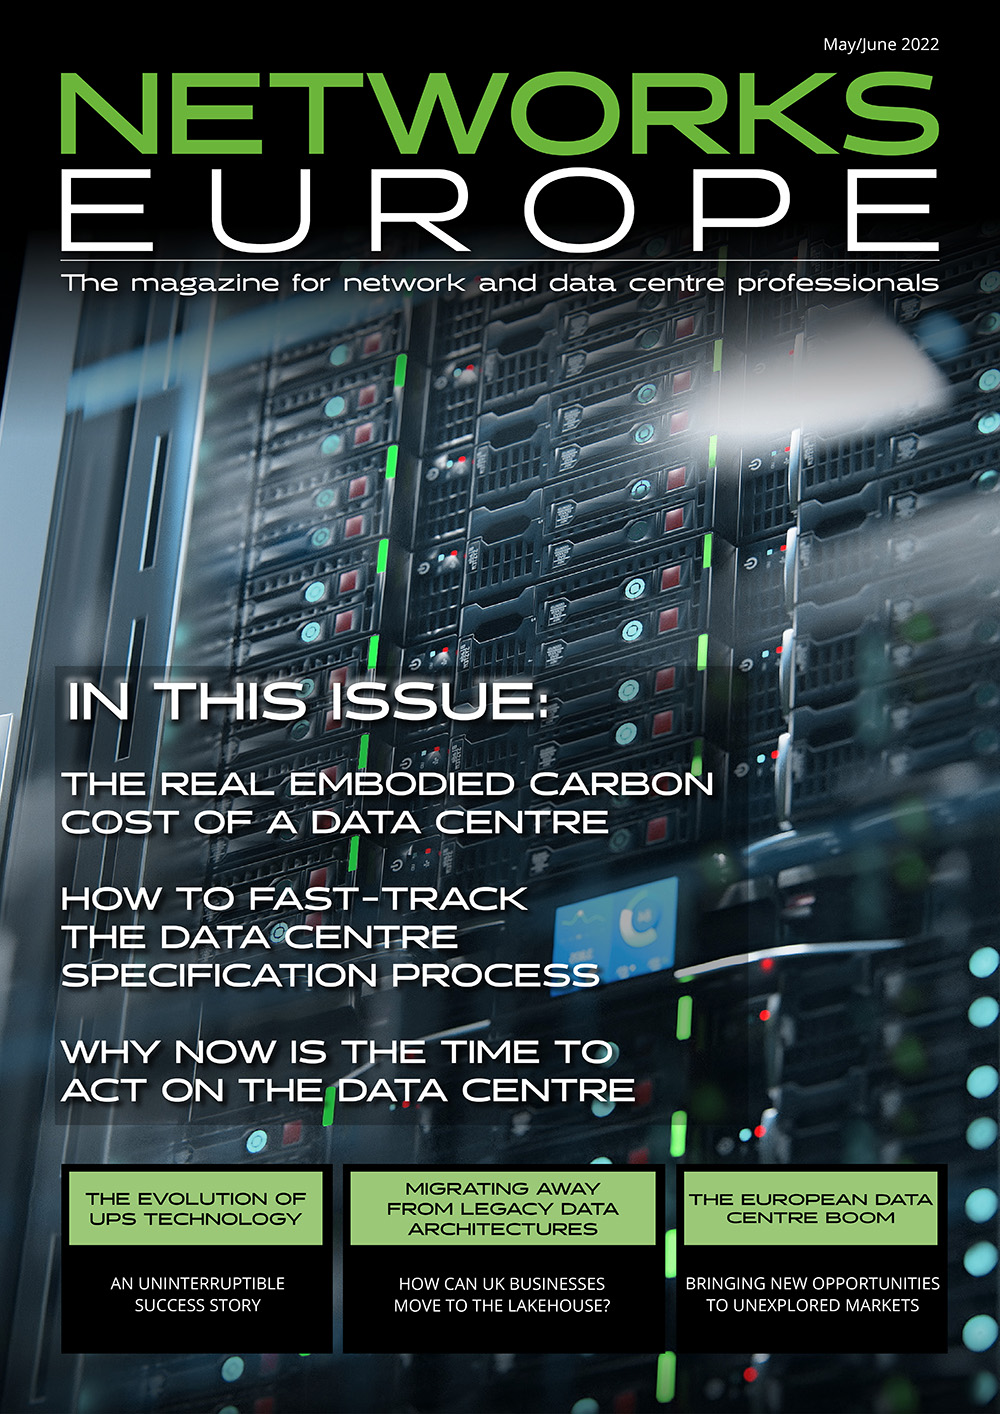 NEM - May/June 2022 Issue (front cover)